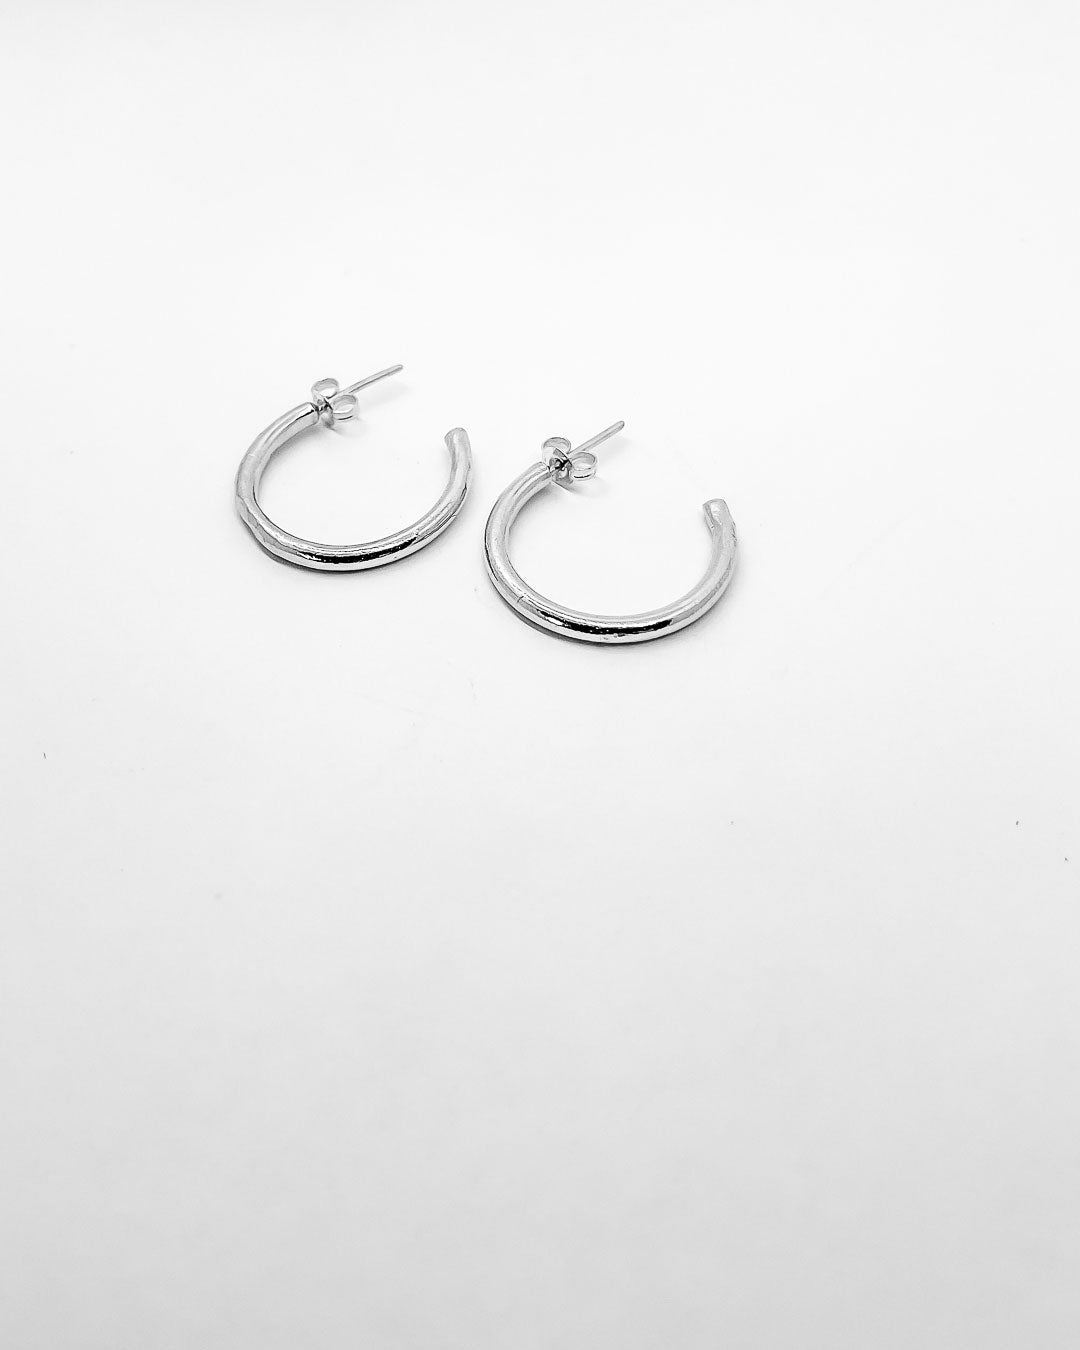 A pair of Sterling Silver Hoop earrings lying next to each other on a white surface